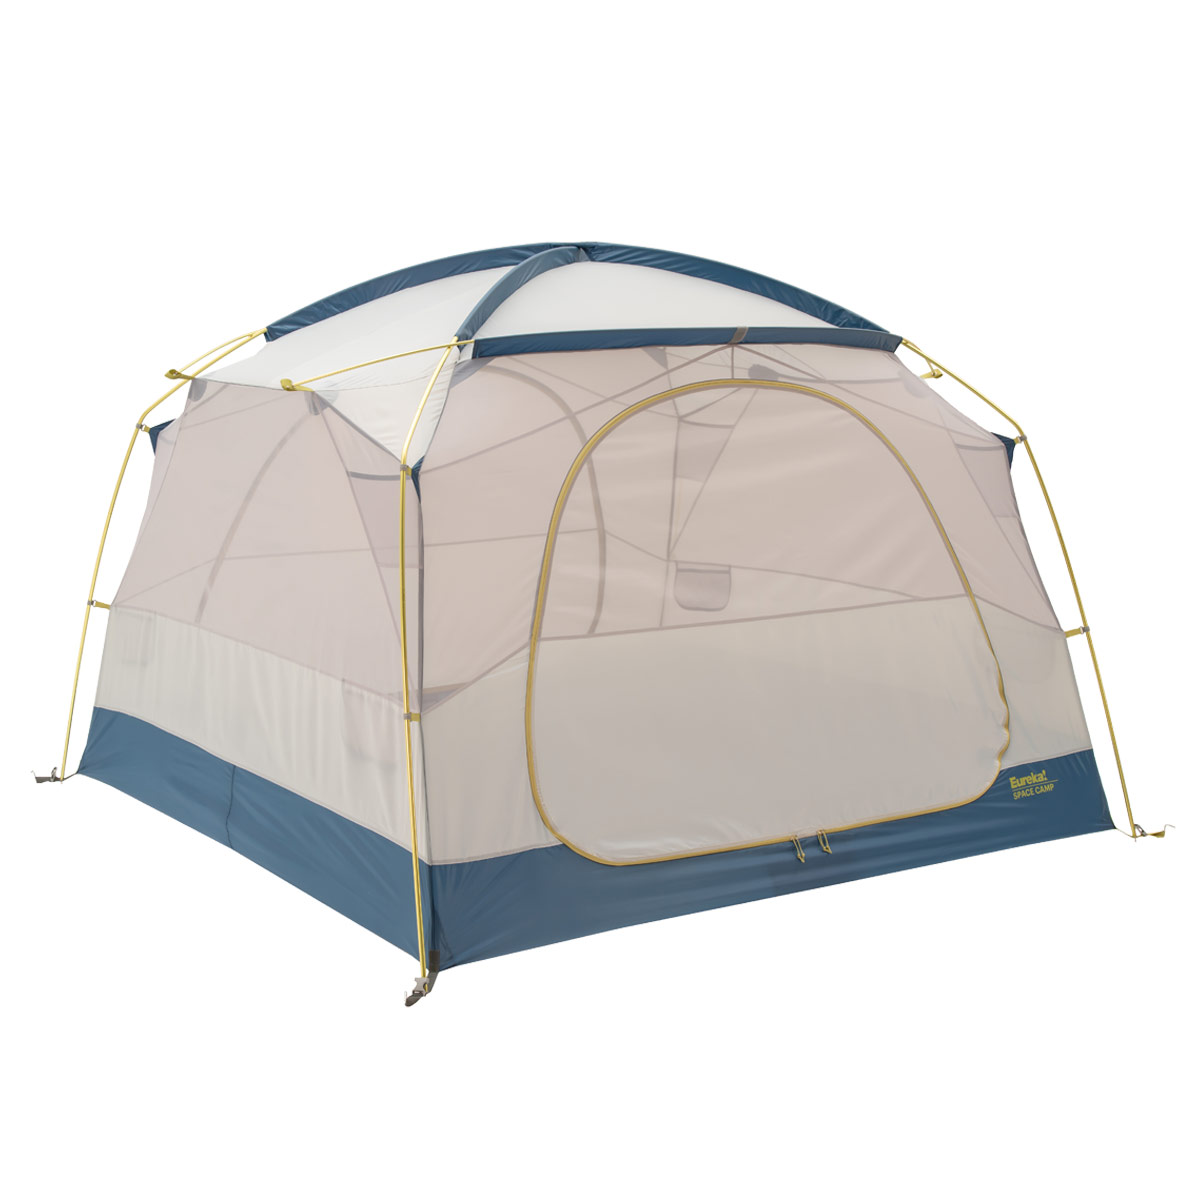 Space Camp 6 Person Tent